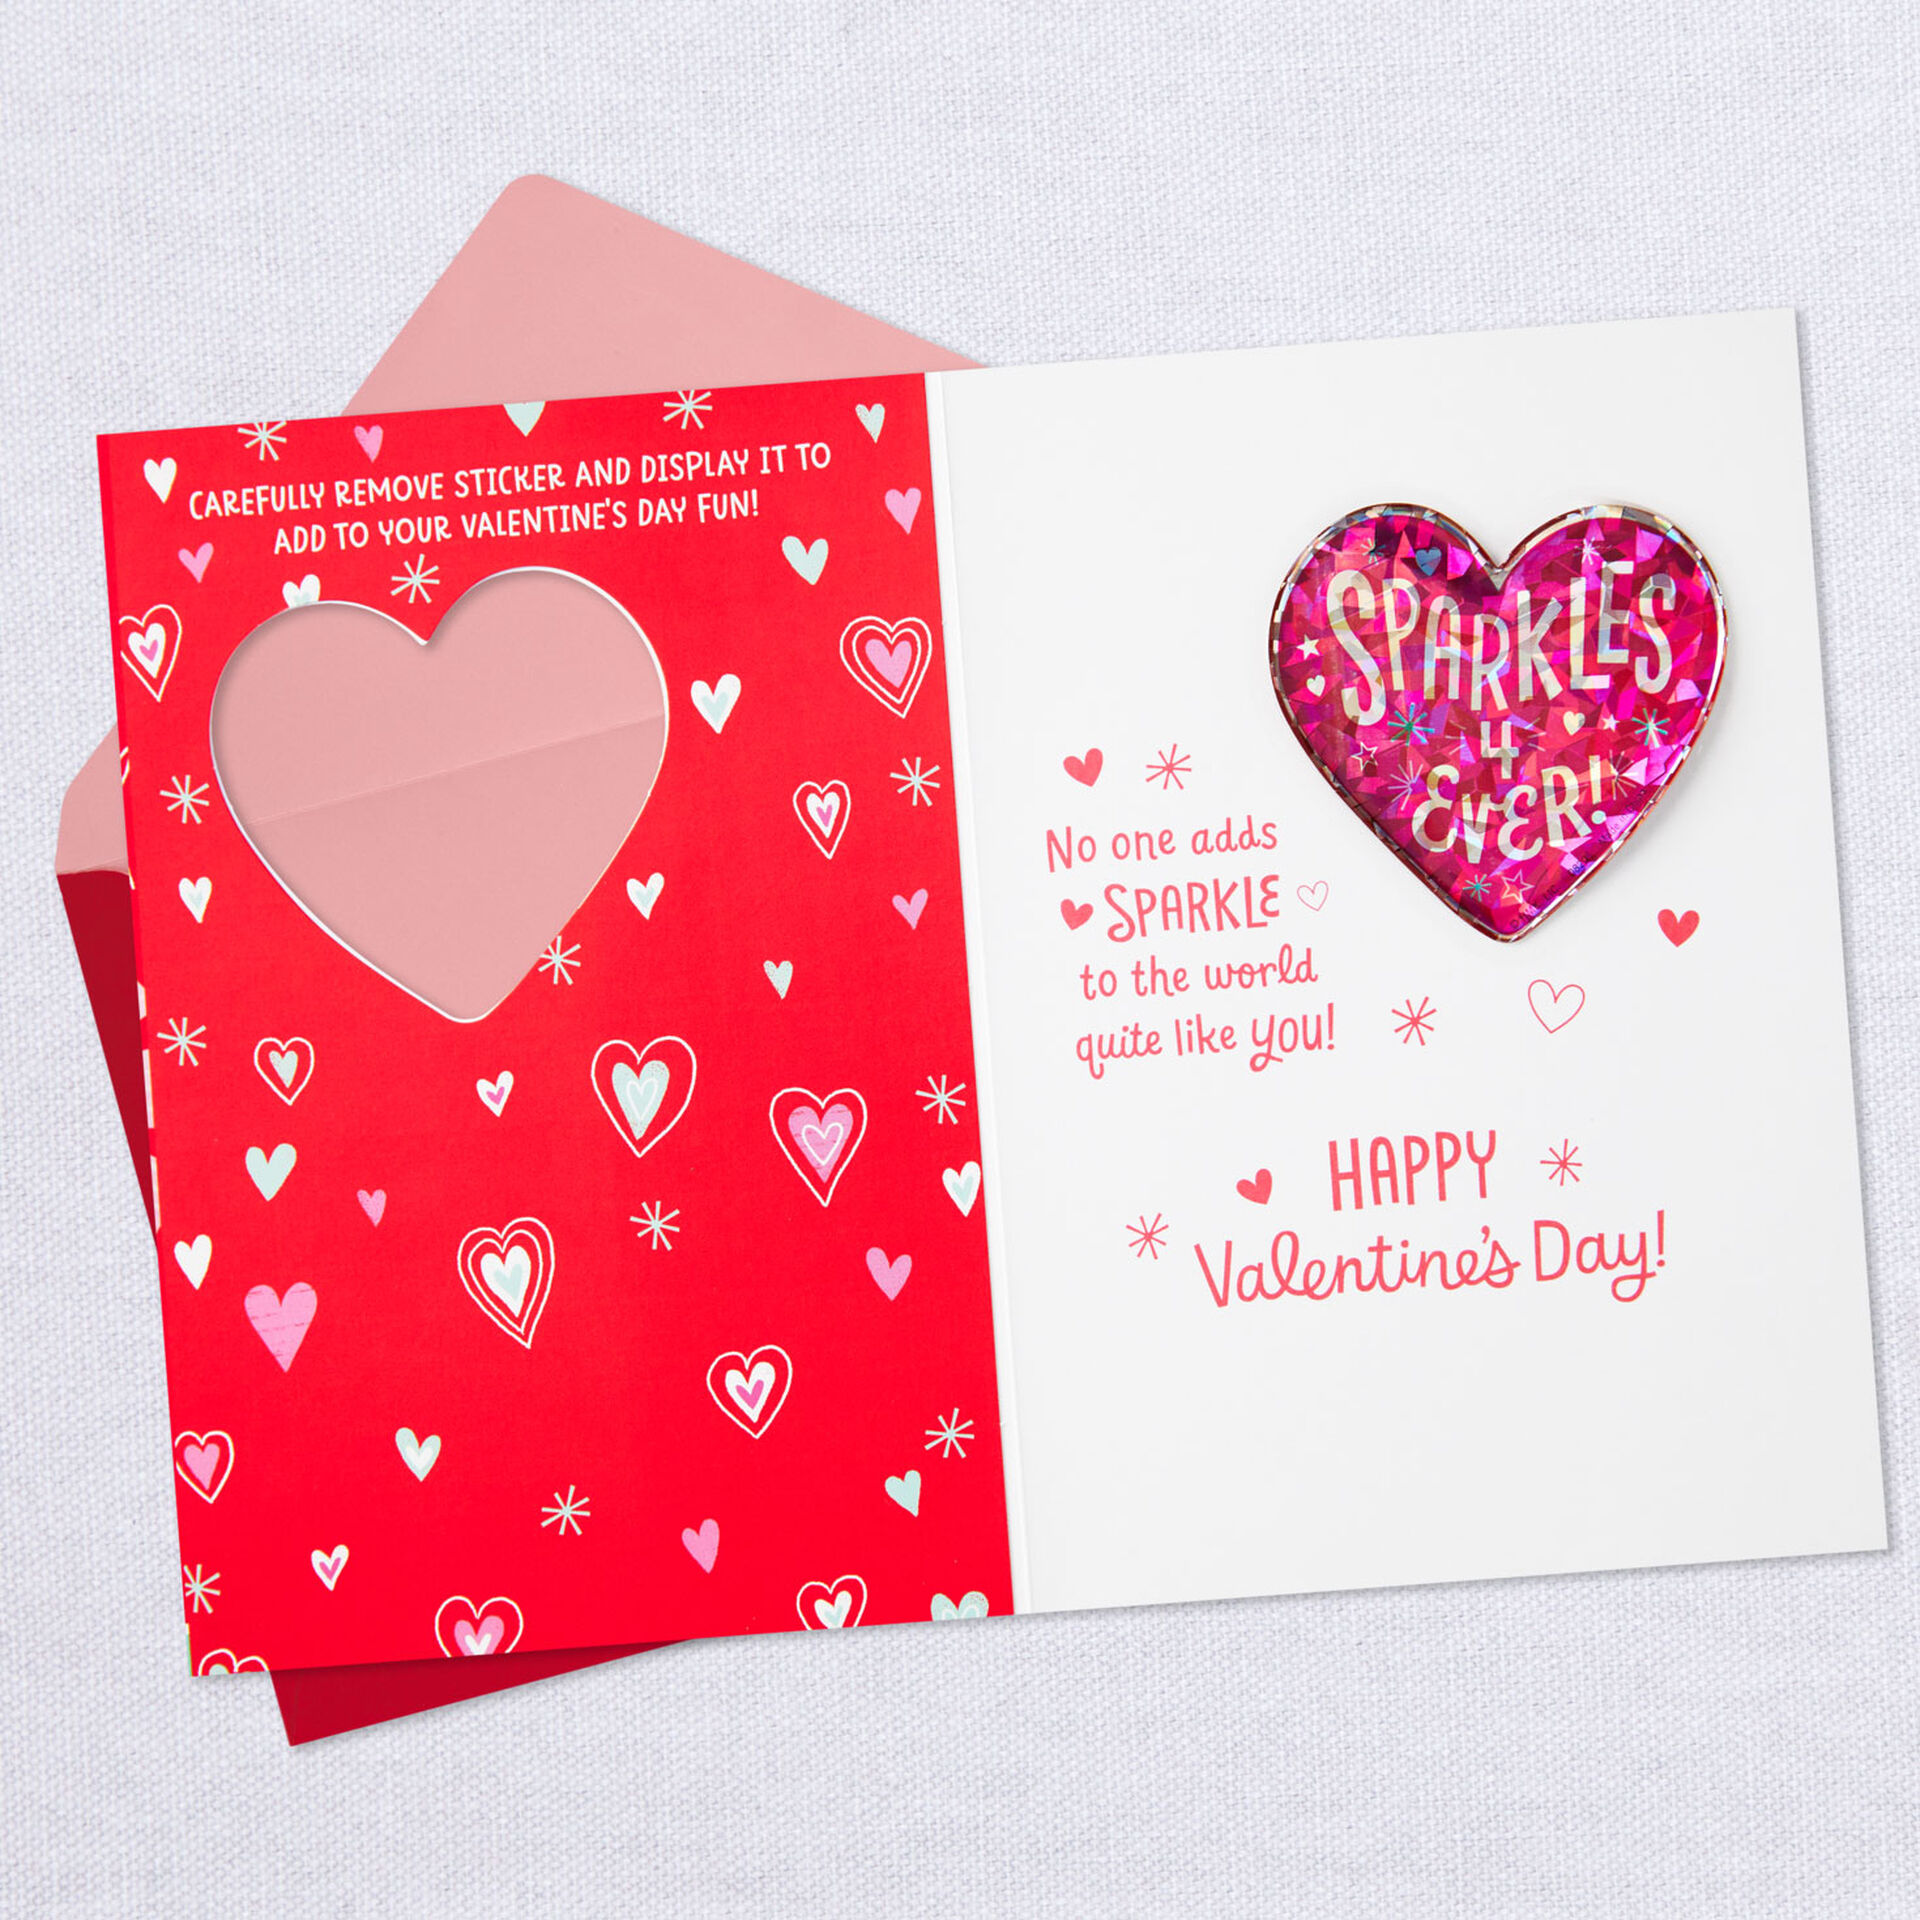 sparkles forever granddaughter valentines day card with sticker